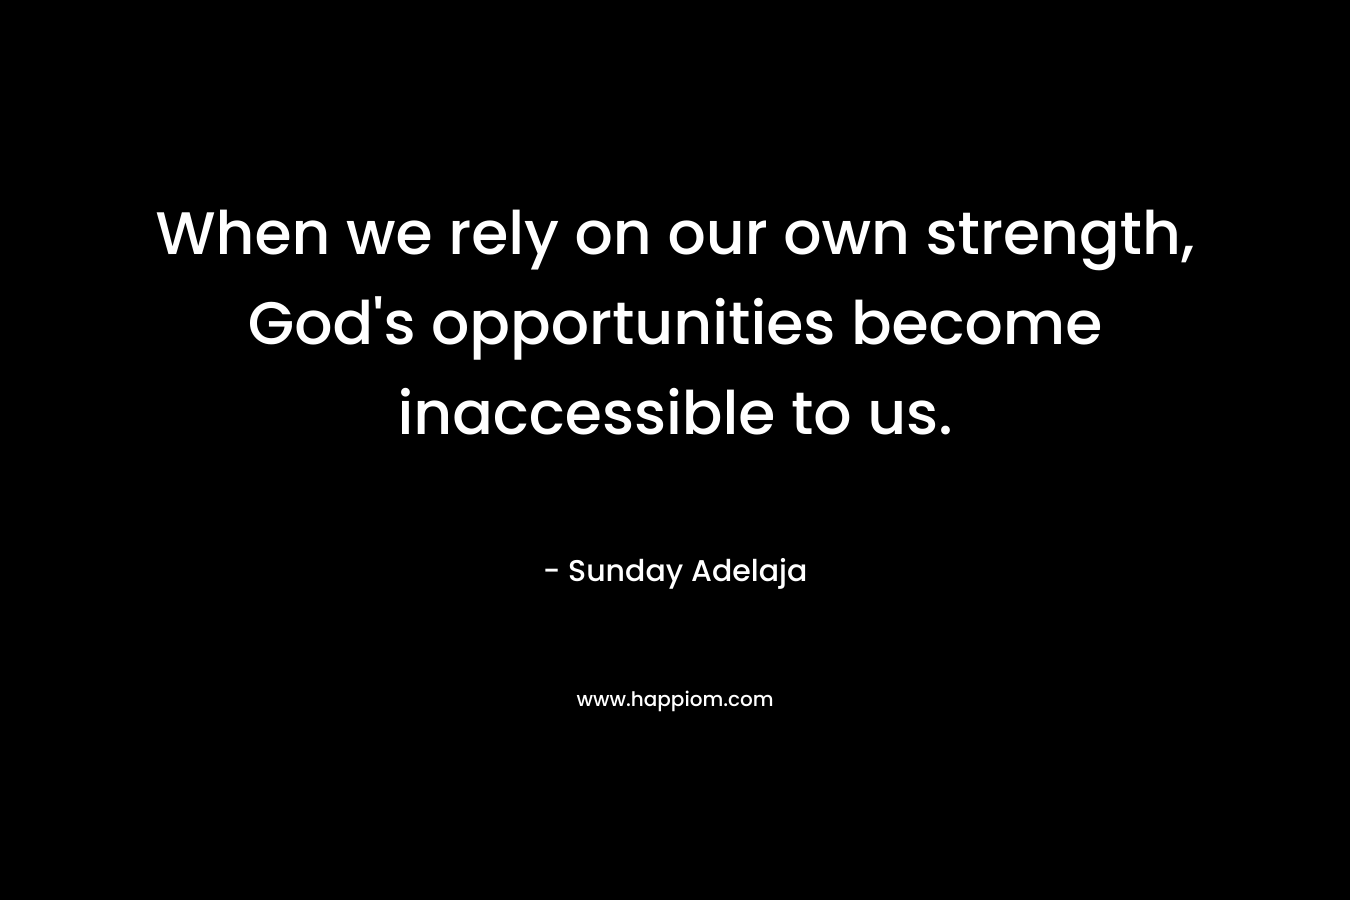 When we rely on our own strength, God's opportunities become inaccessible to us.